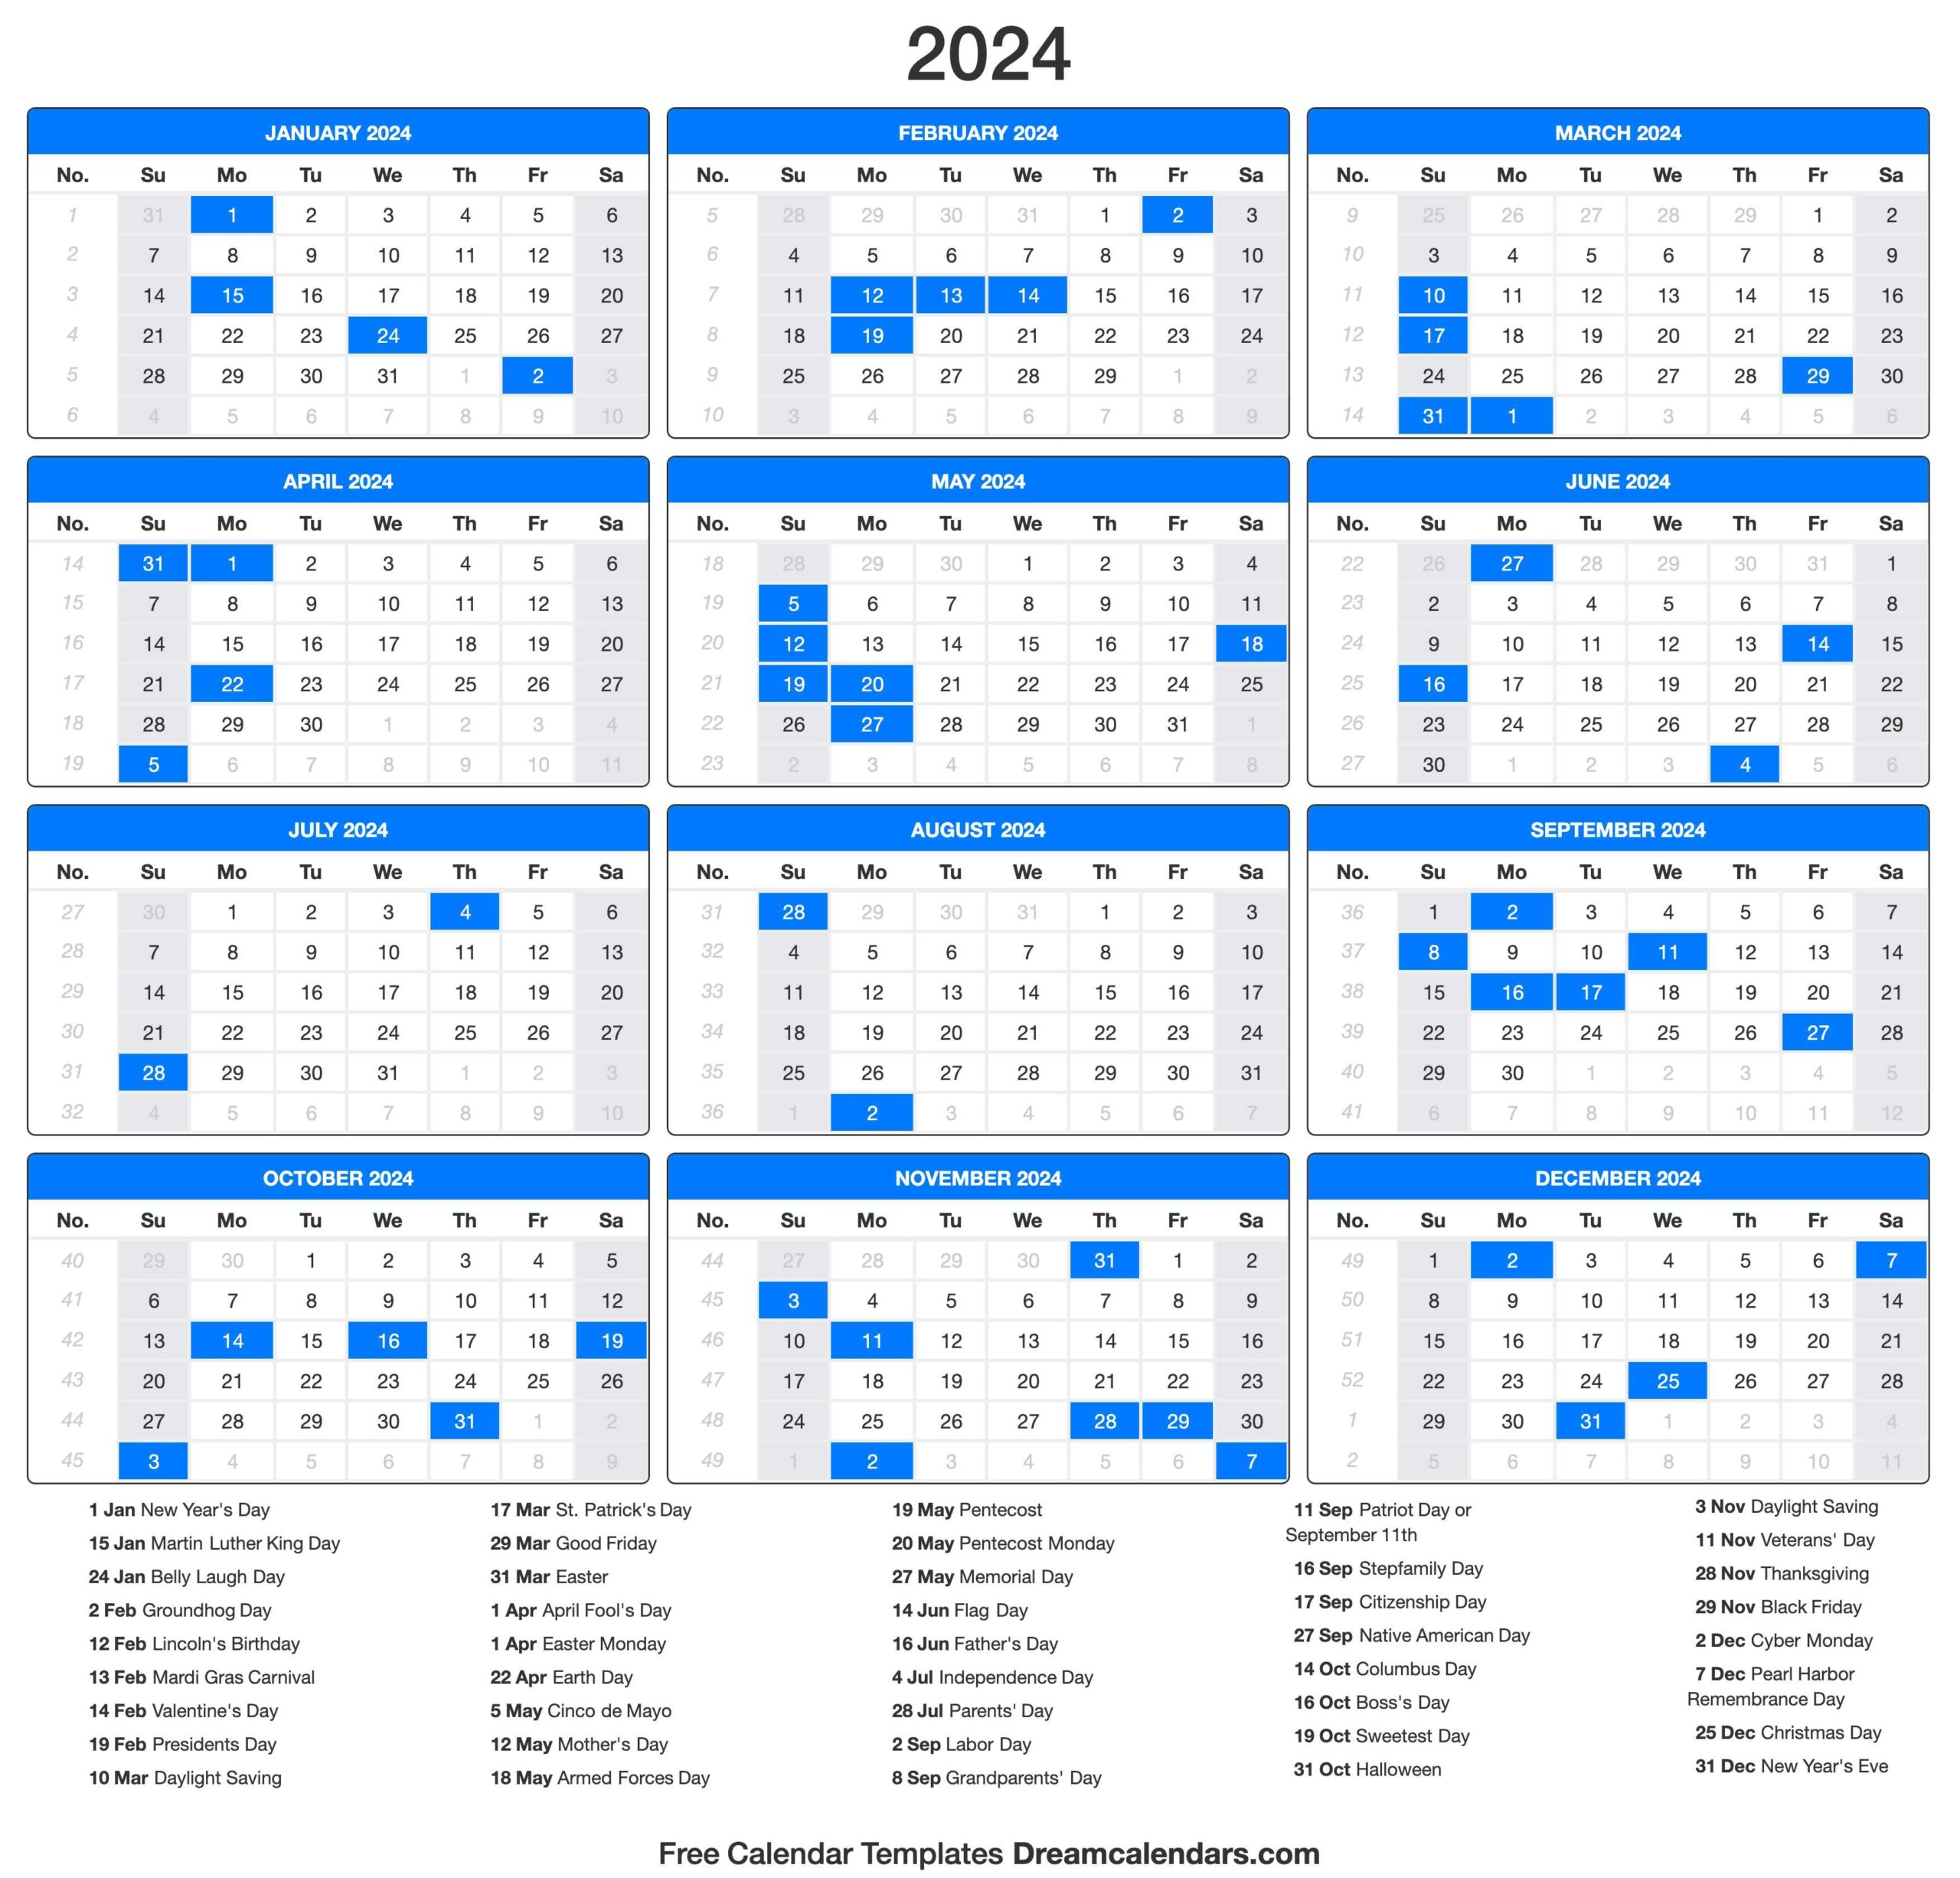 2024 Calendar - Free Printable 2024 Calendar With Holidays 4 Months Per Page